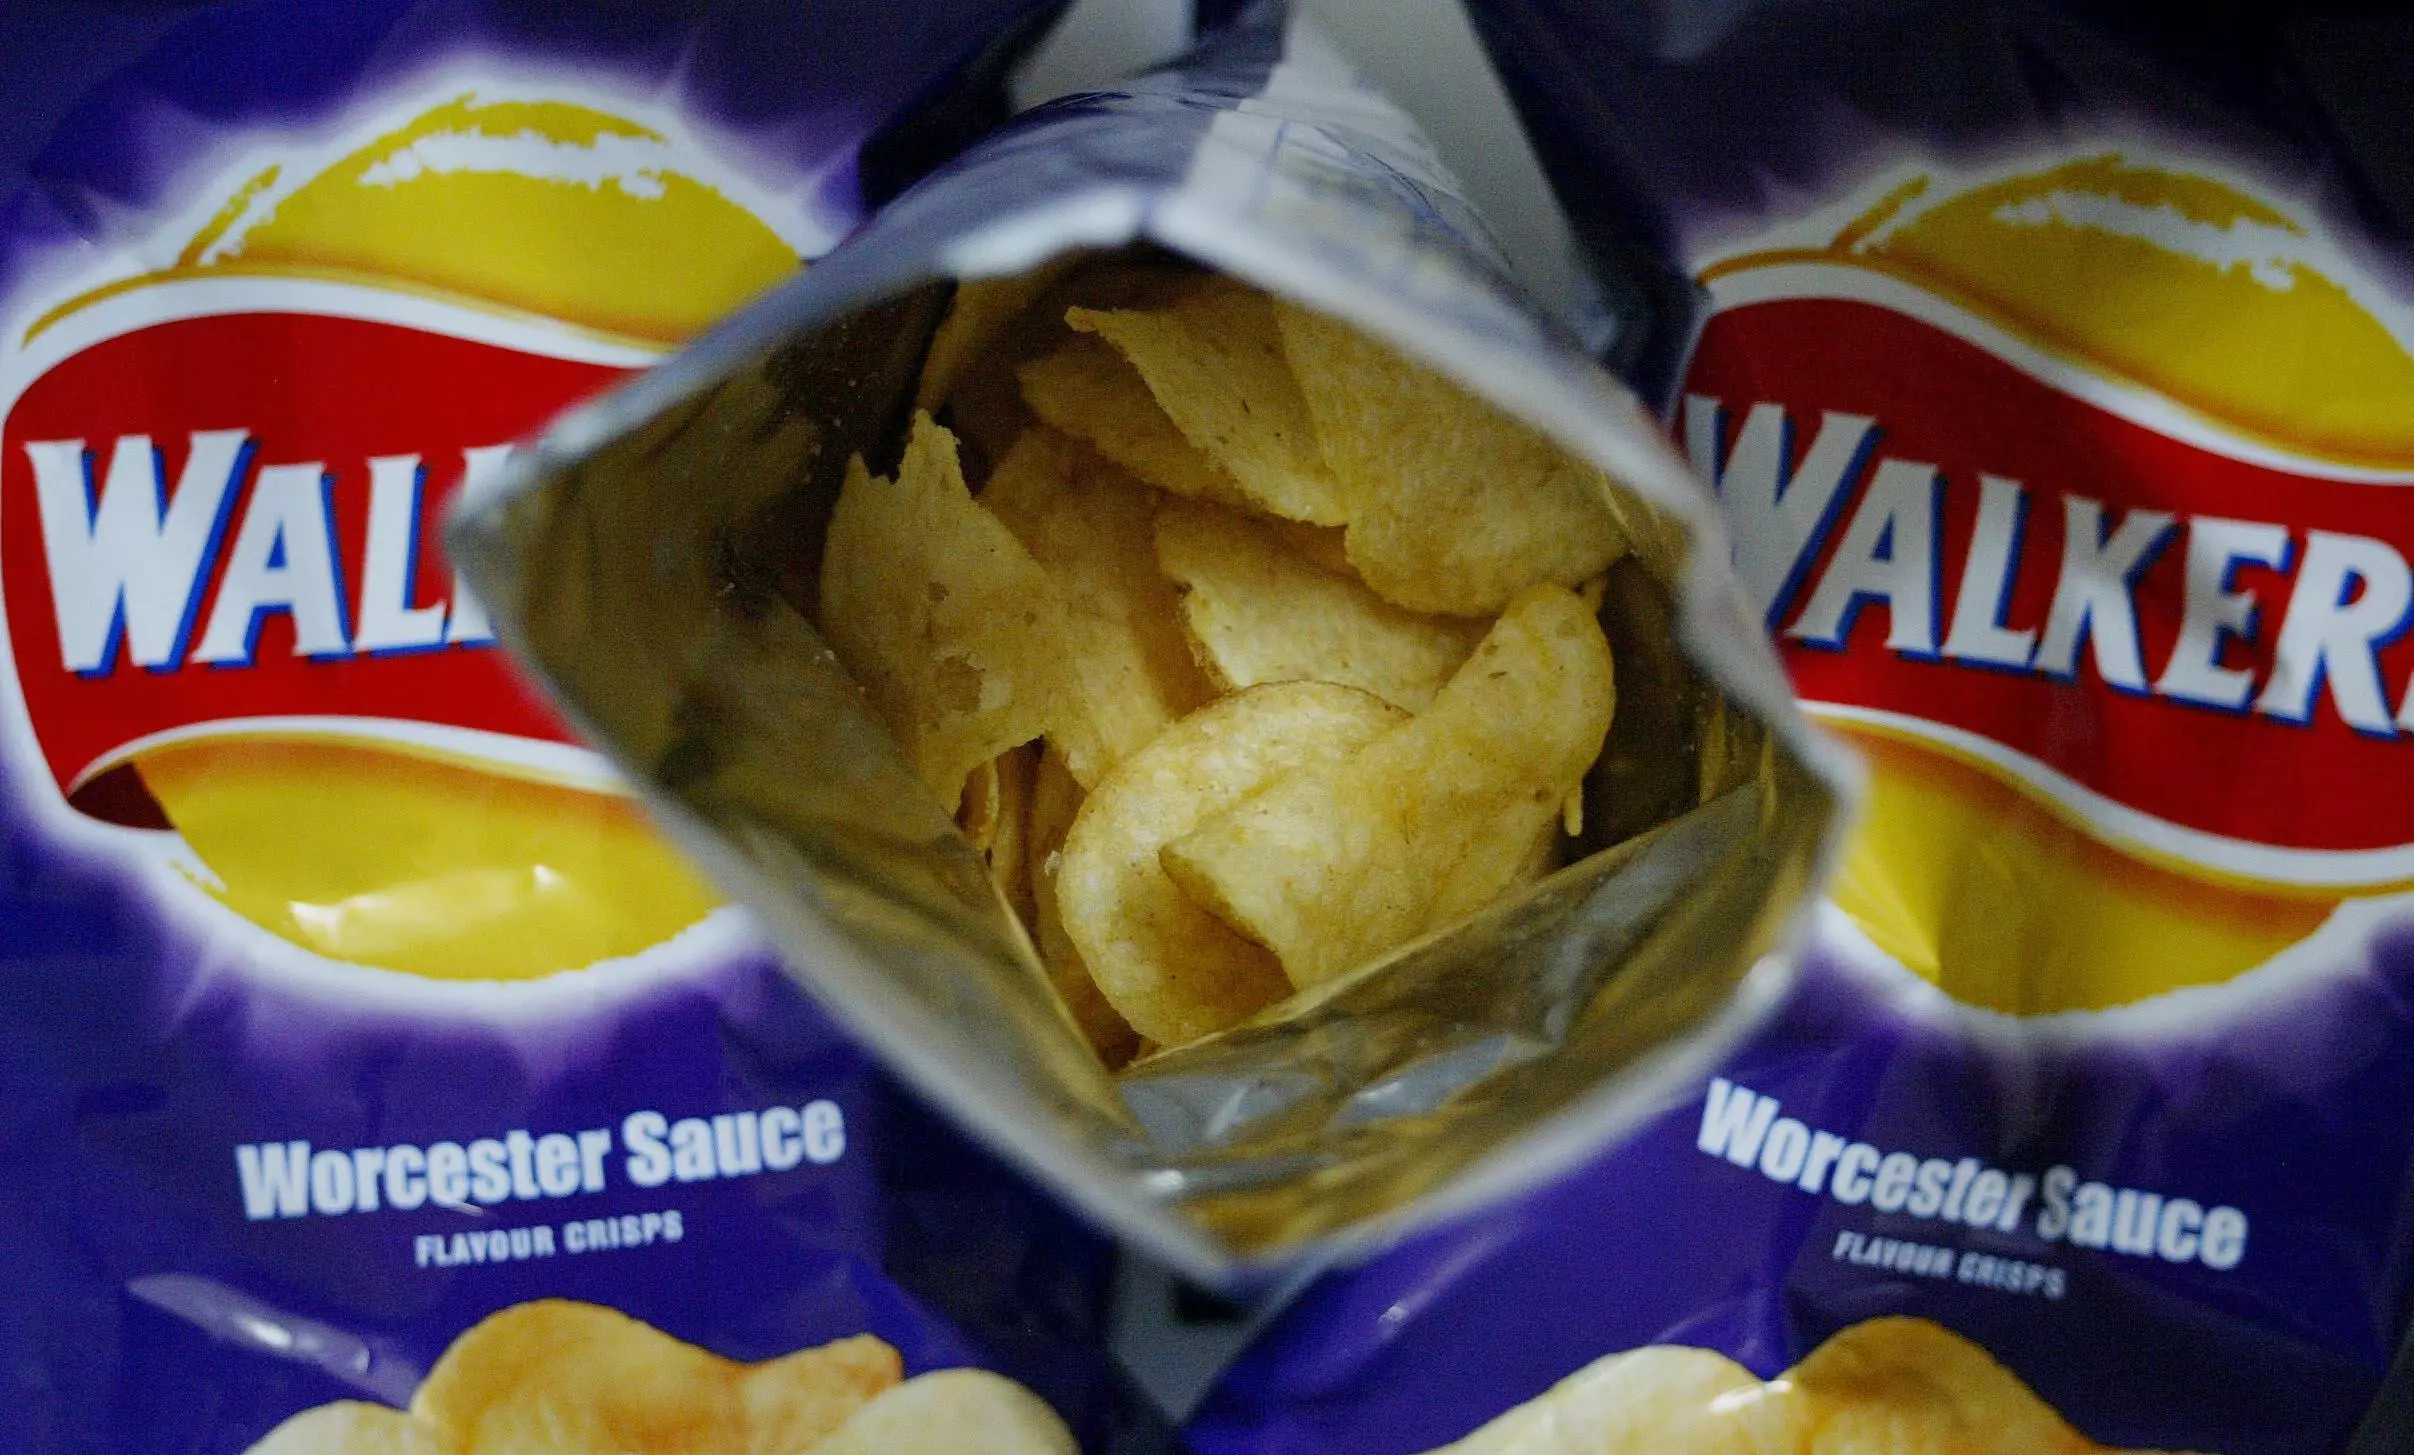 Chipsticks are owned by Walkers.